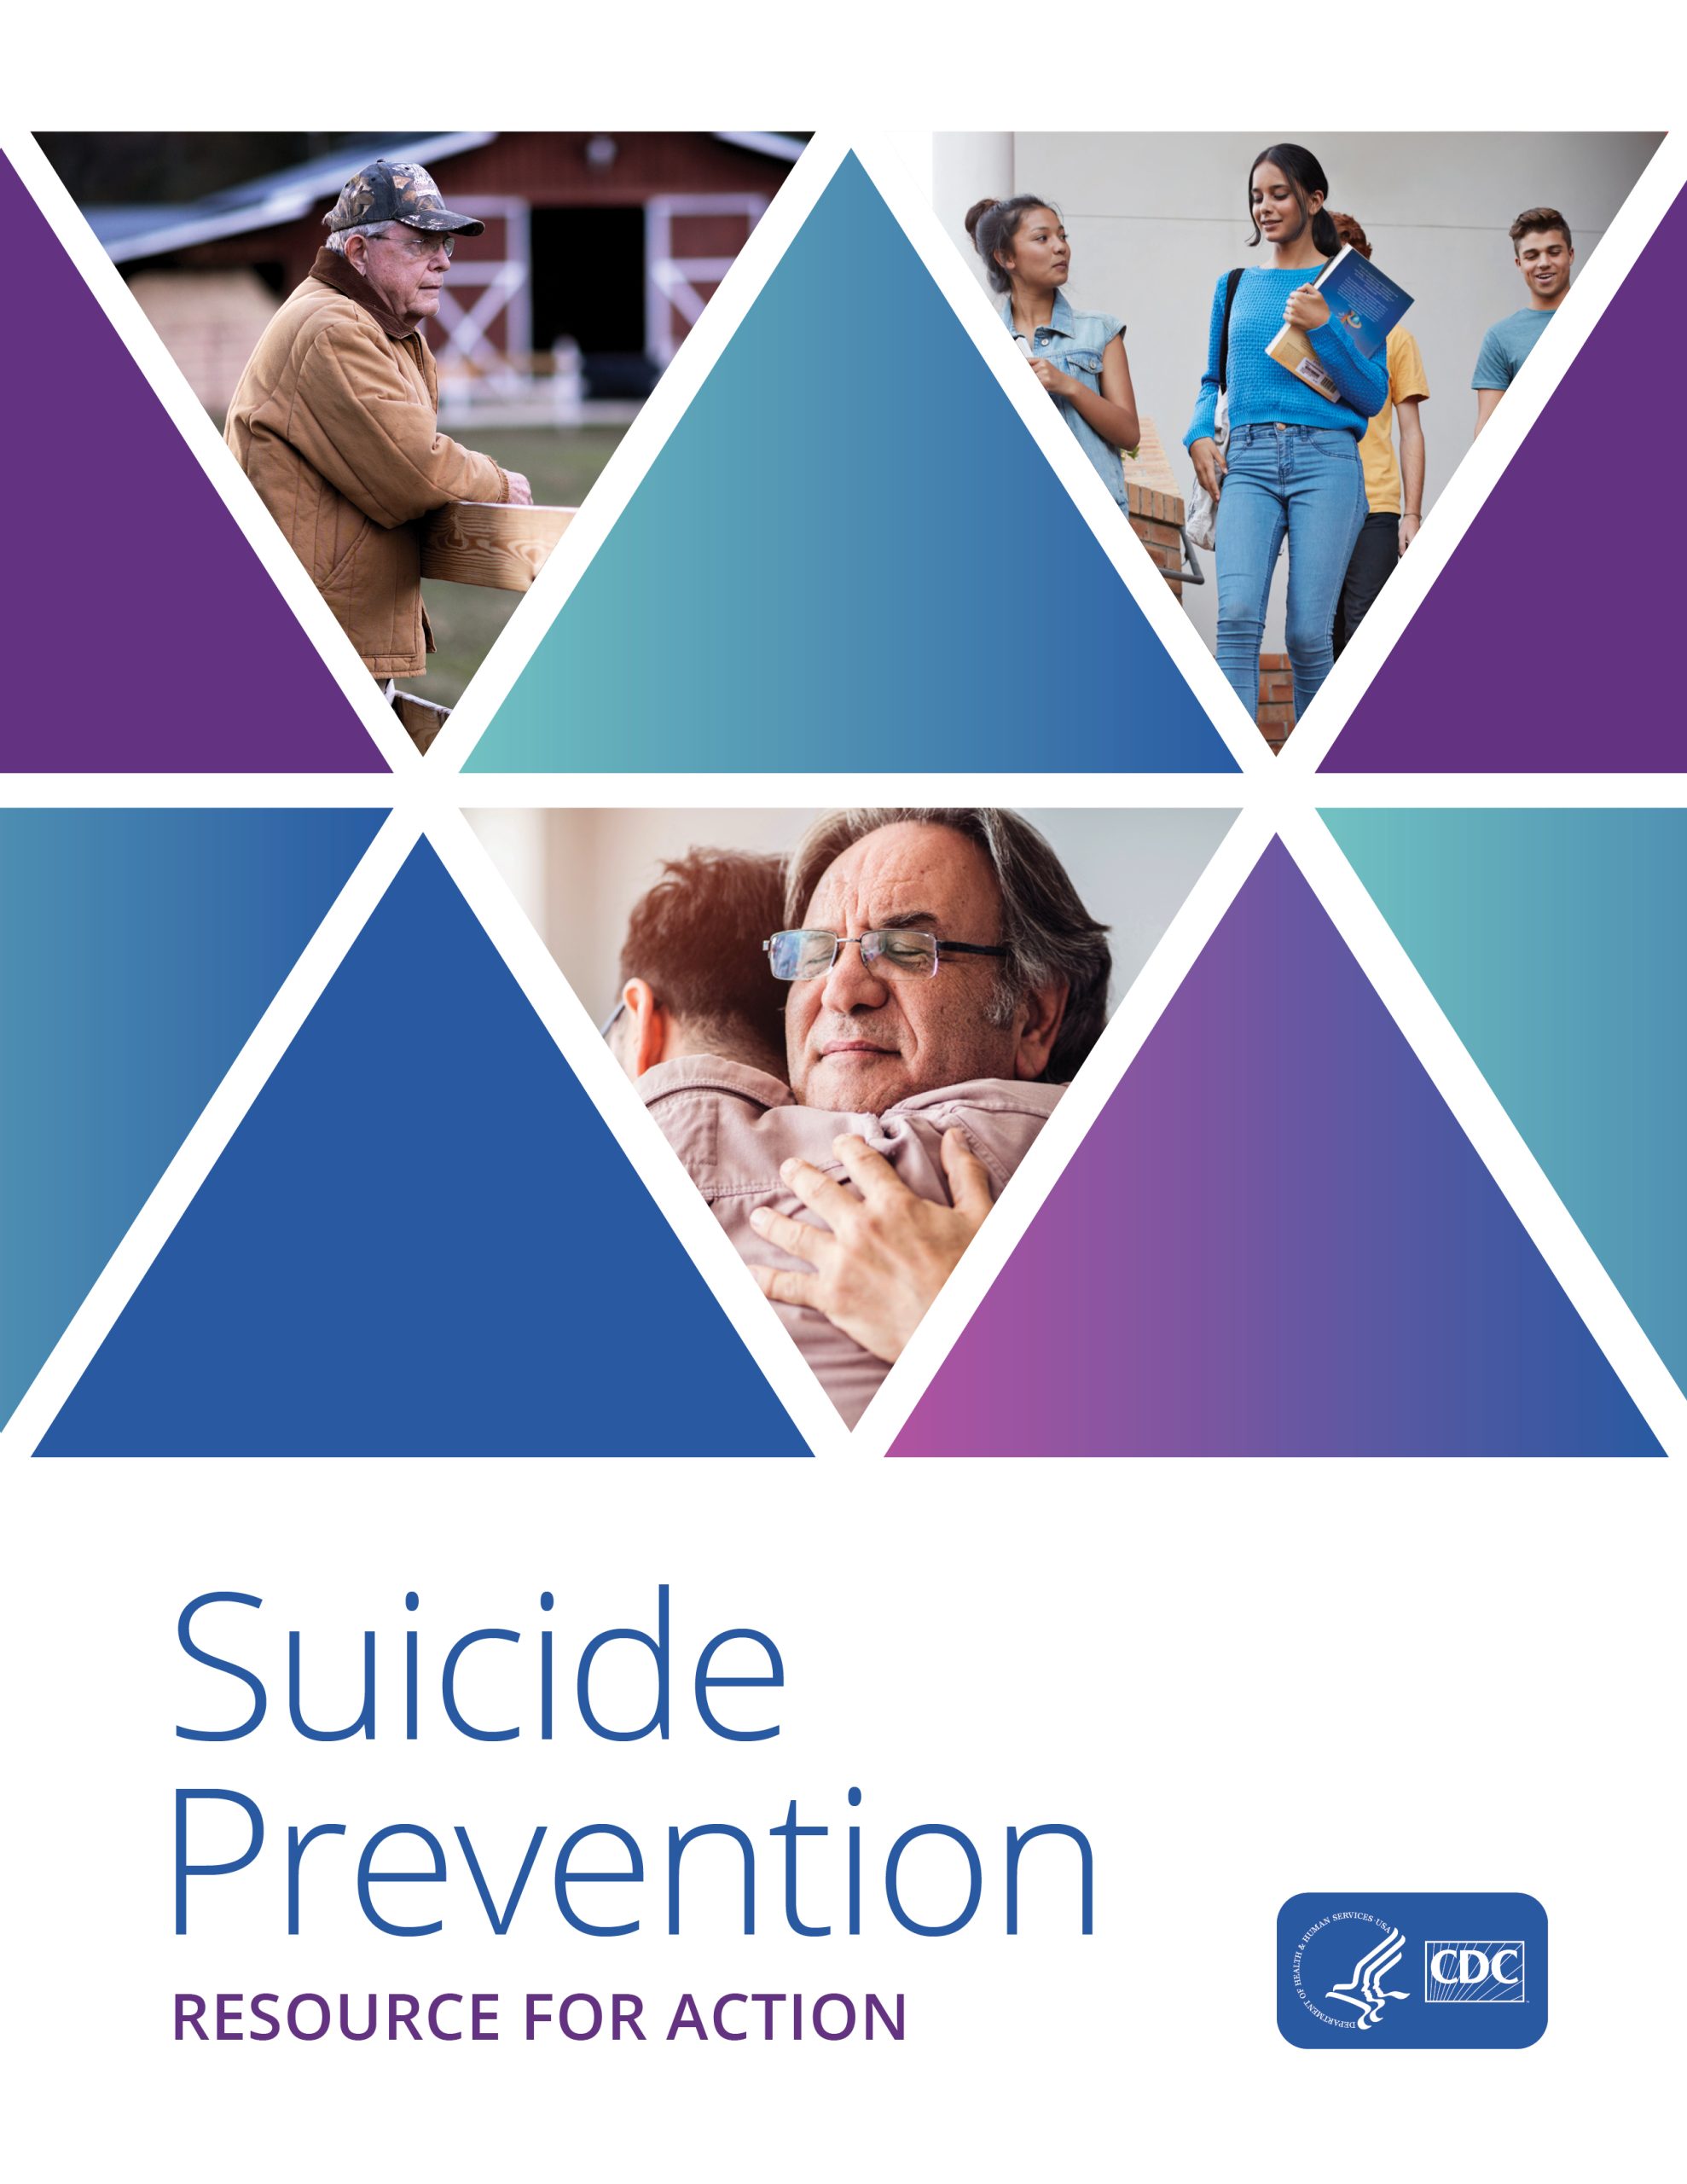 Cover image of Suicide Prevention Resource for Action PDF.